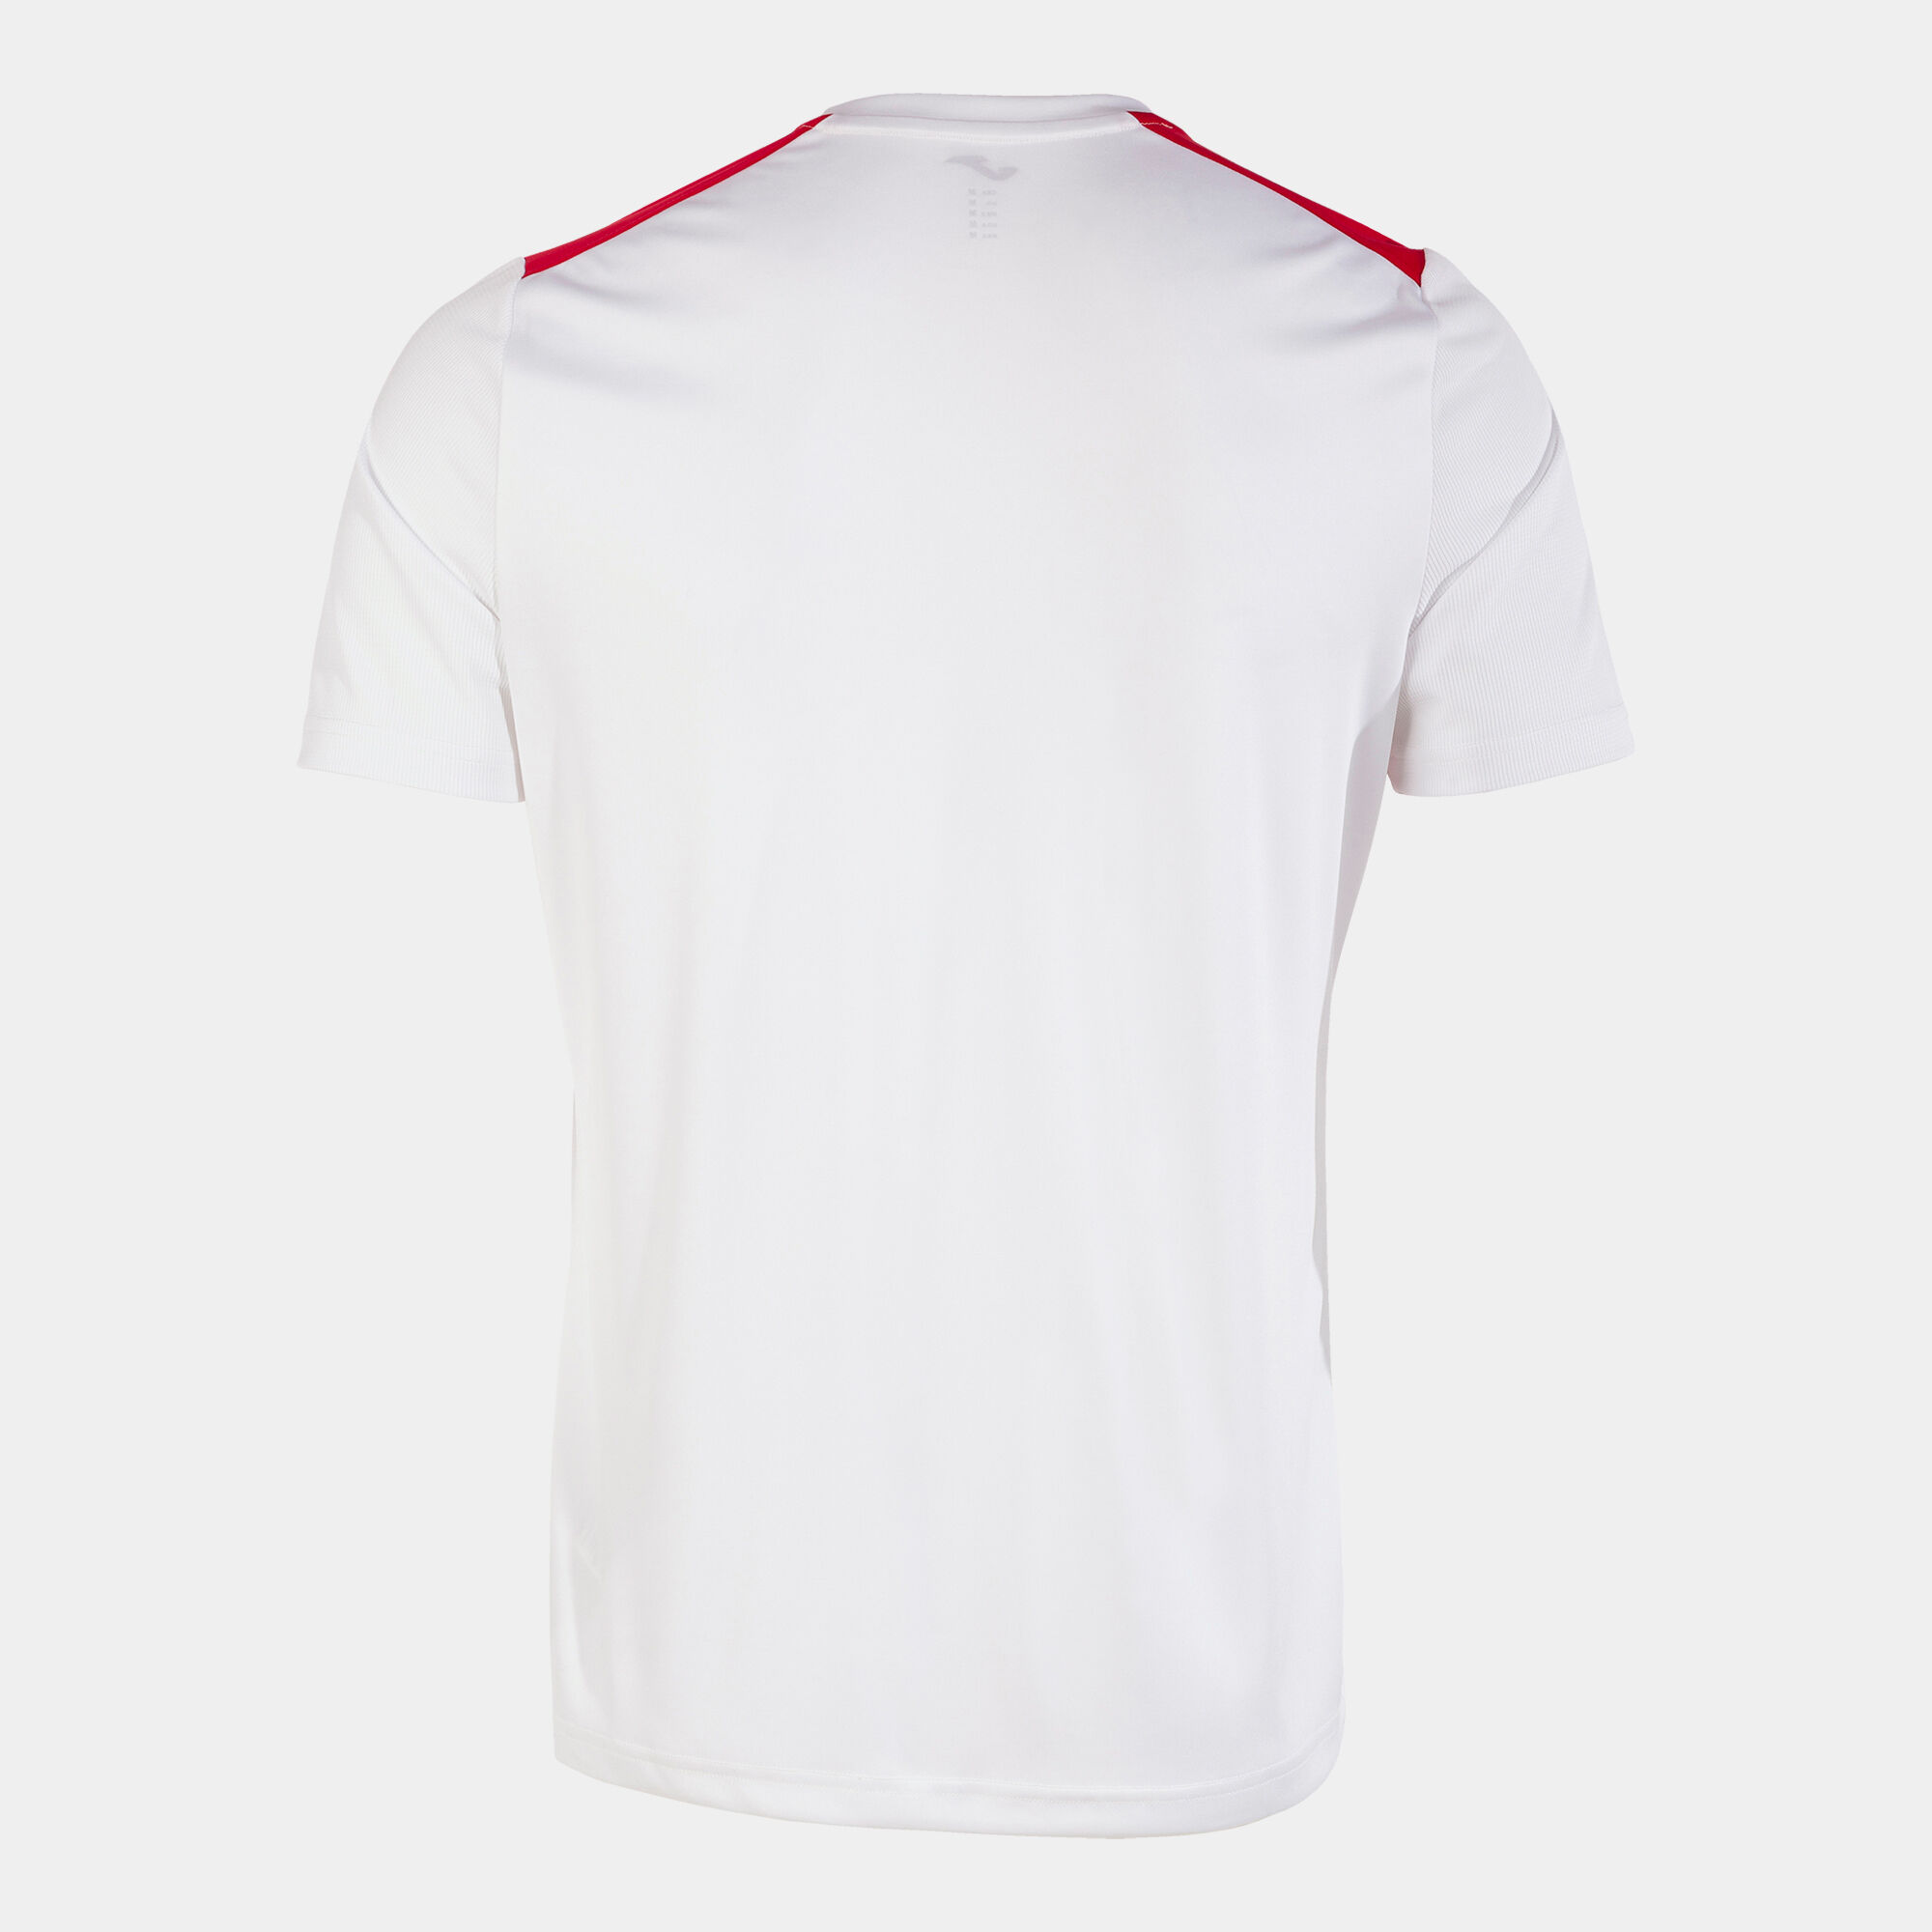 Maillot manches courtes homme Championship VII blanc rouge